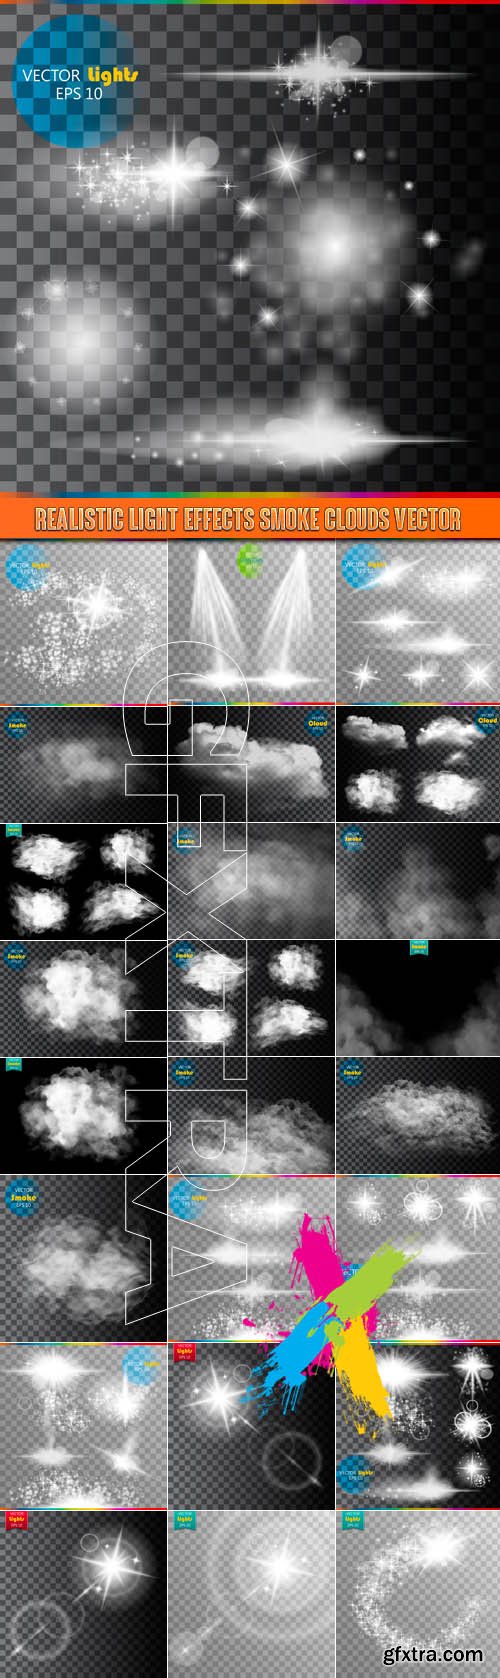 Realistic light effects smoke clouds vector